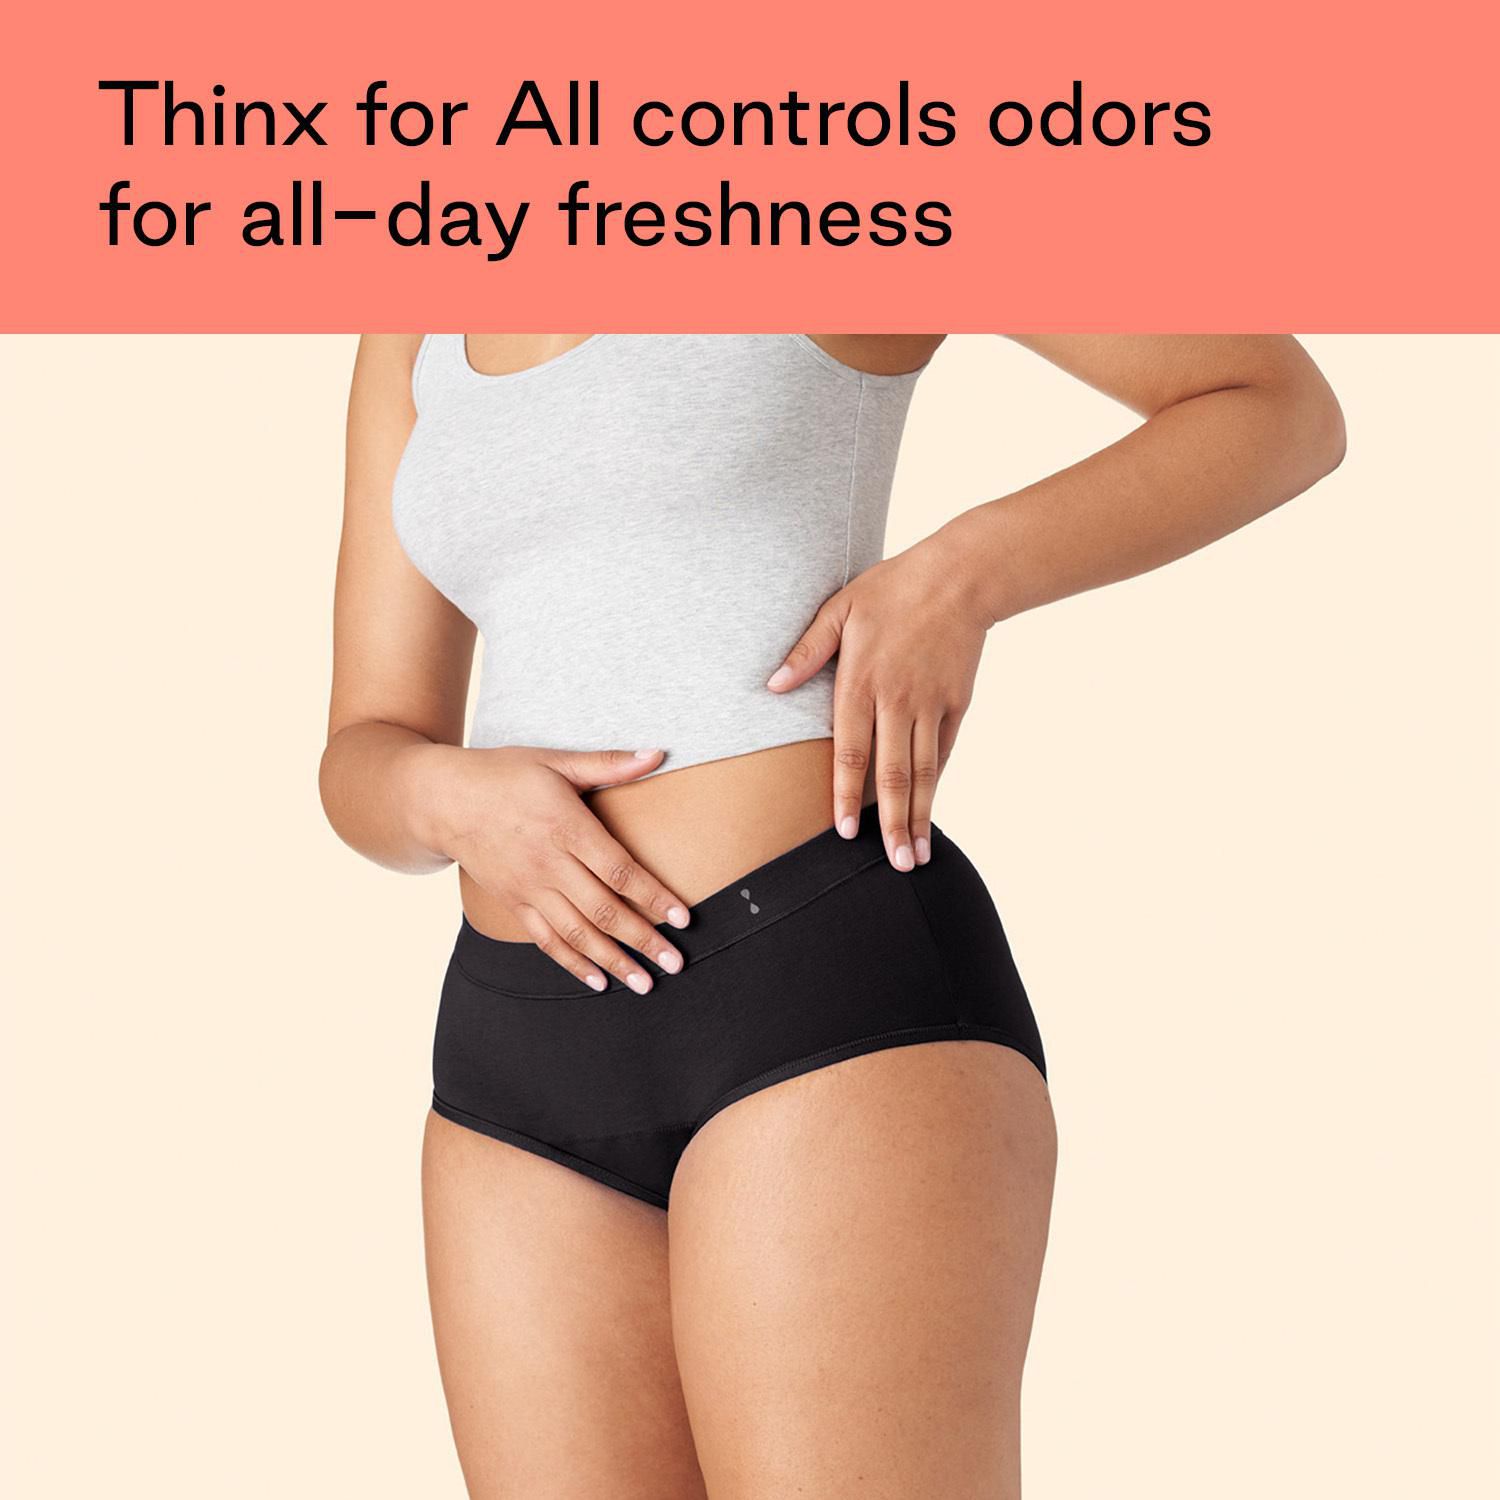 Sustainable Period Underwear Brand Thinx Is Now Available at Walmart Stores  Nationwide